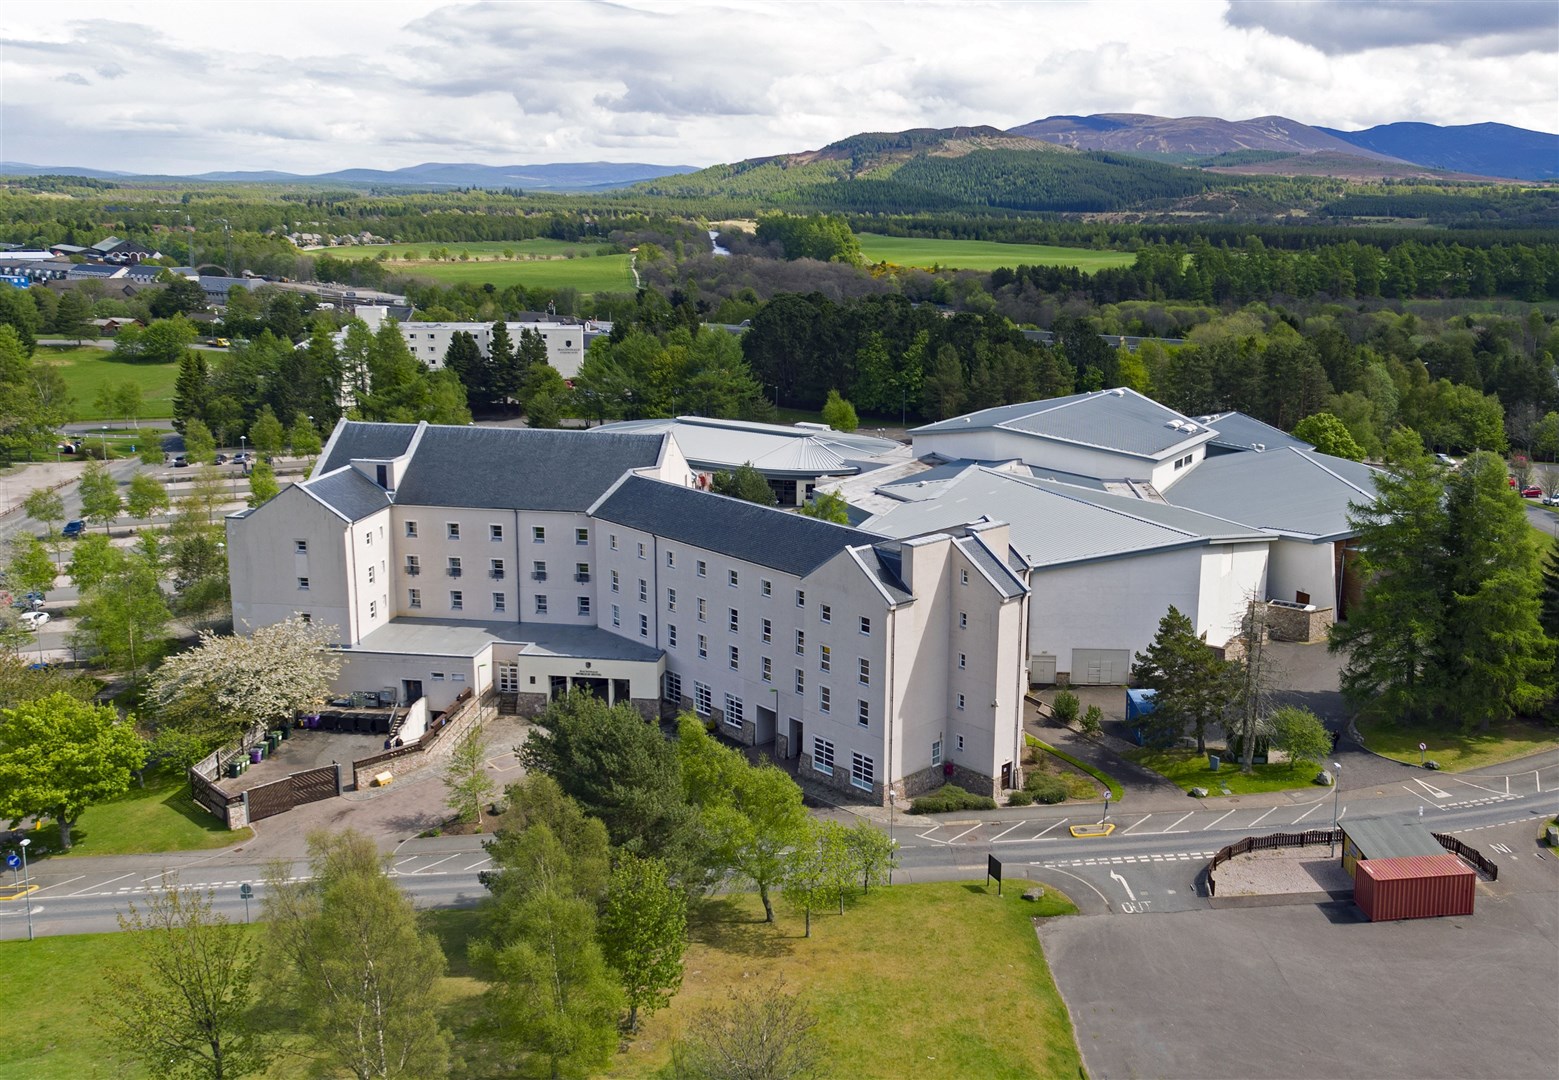 Loads to do... the Macdonald Aviemore Resort has its own Highland Leisure Arena, cinema and retail centre as well as a range of restaurants and bars.